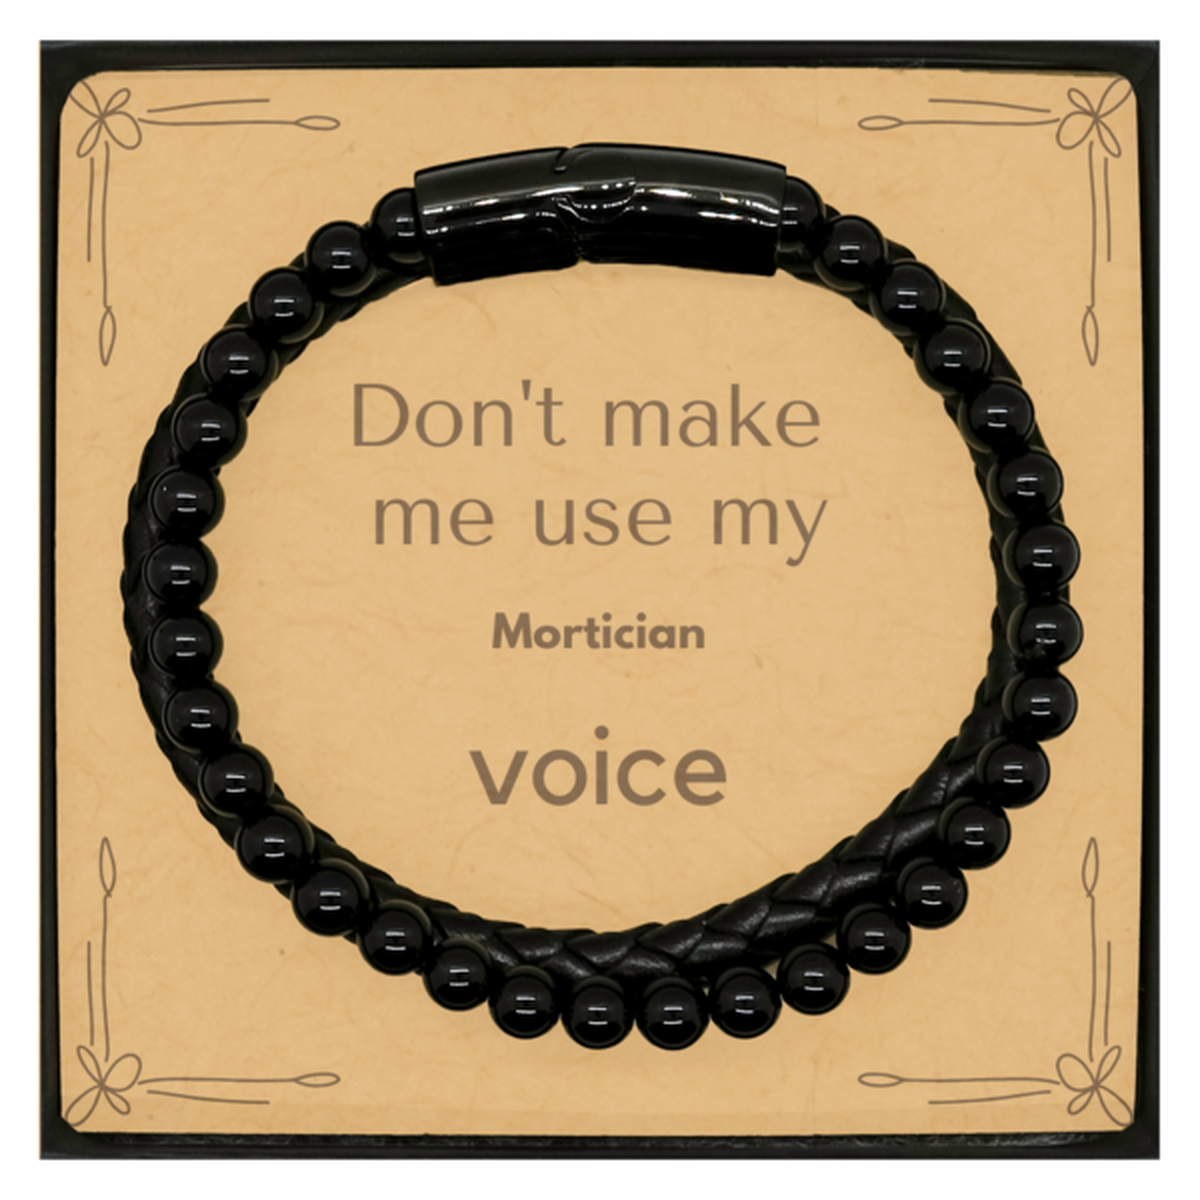 Don't make me use my Mortician voice, Sarcasm Mortician Card Gifts, Christmas Mortician Stone Leather Bracelets Birthday Unique Gifts For Mortician Coworkers, Men, Women, Colleague, Friends